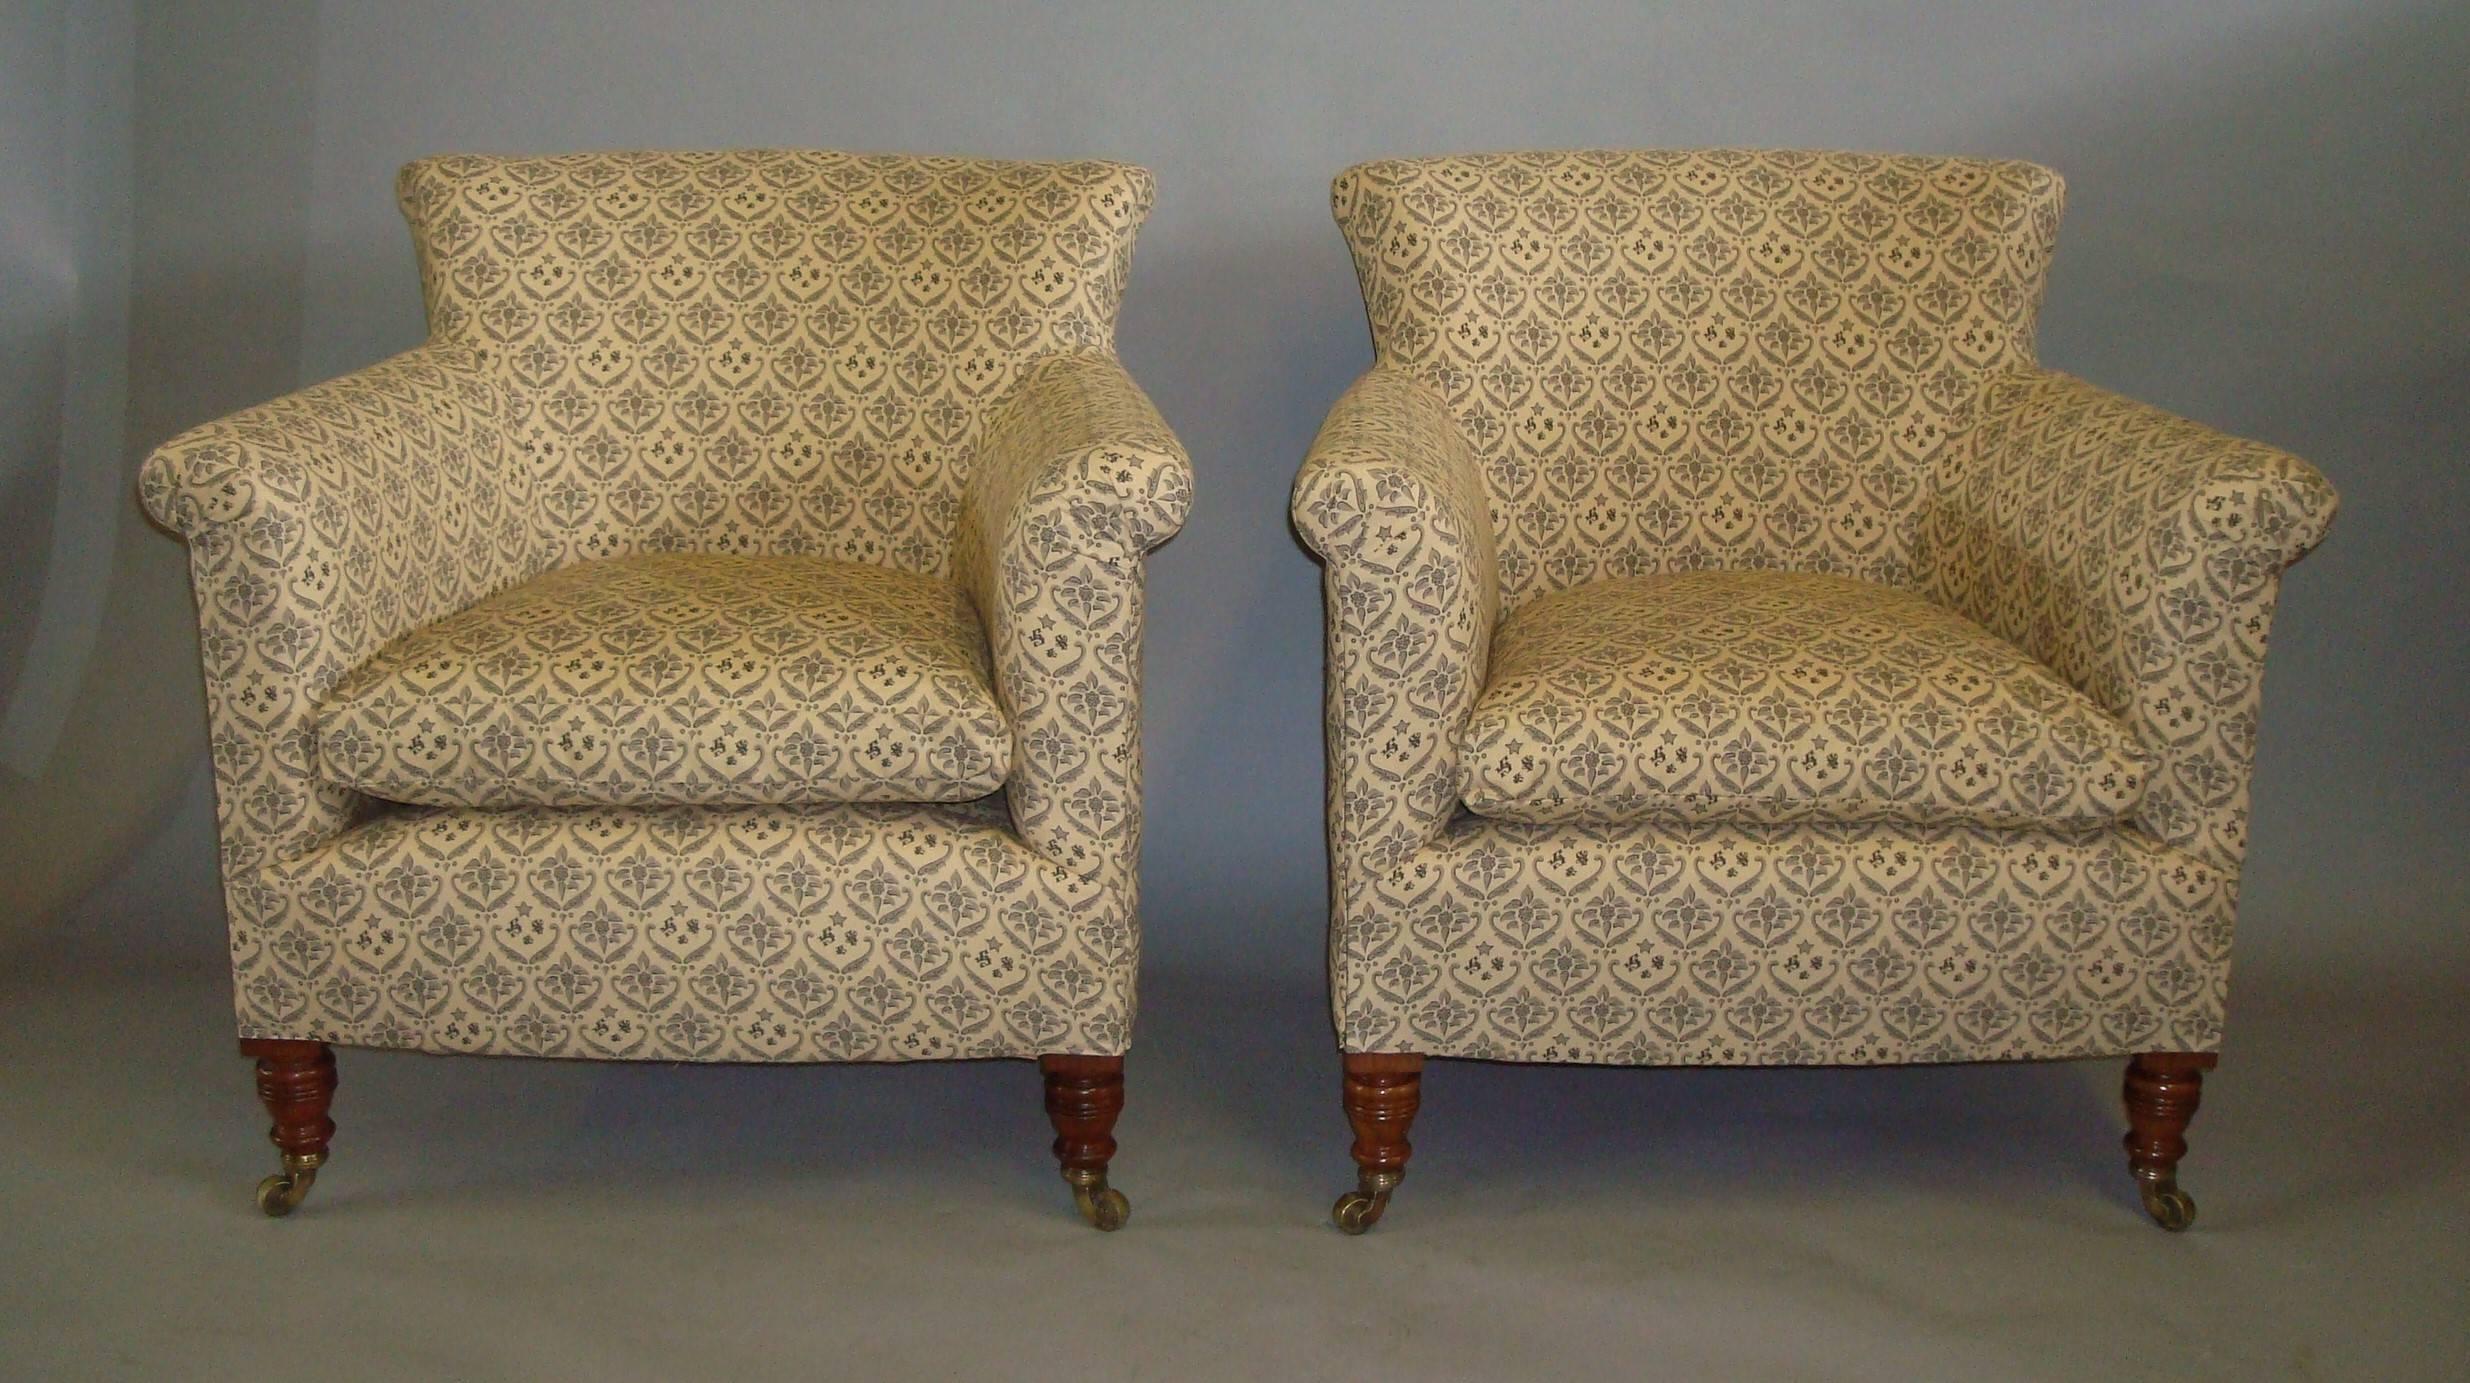 Late 19th century pair of Howard and Sons walnut tub shaped armchairs, of neat proportions. Newly reupholstered in grey and cream monogrammed Howard and Sons style printed cotton. The curved padded backs and rollover straight arms with a feather